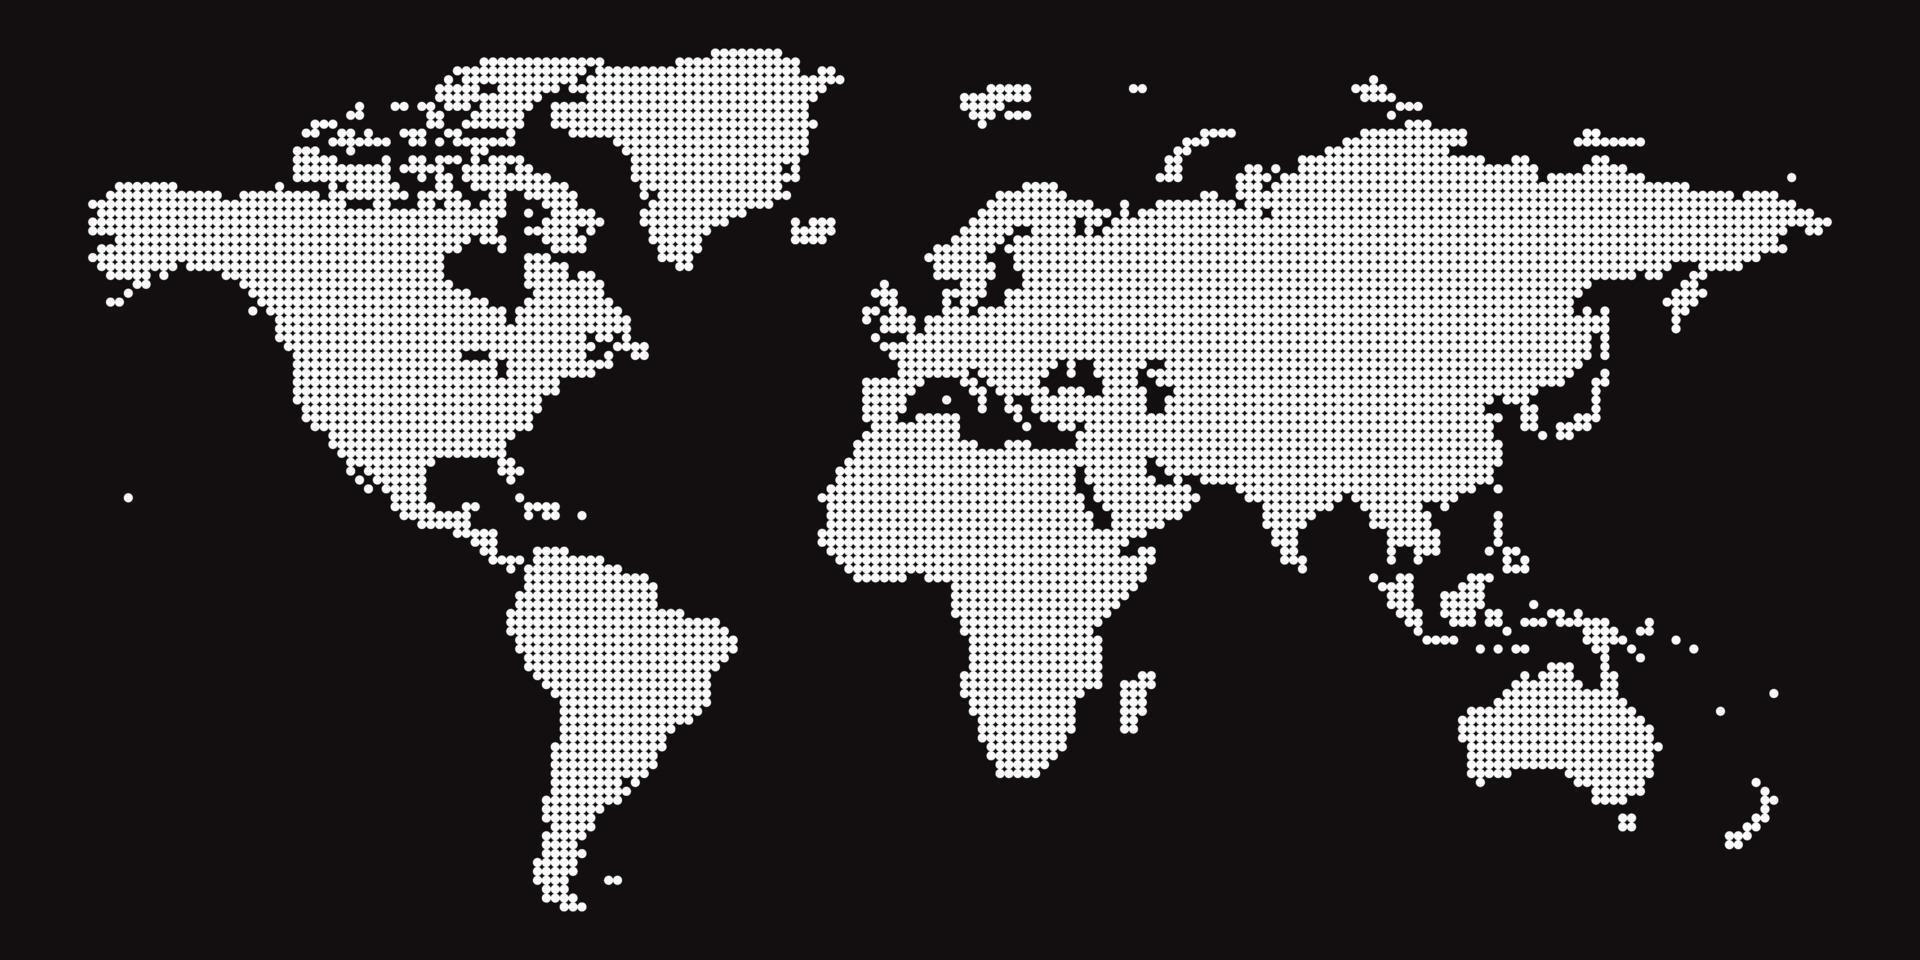 world map on black background. World map template with continents, North and South America, Europe and Asia, Africa and Australia vector